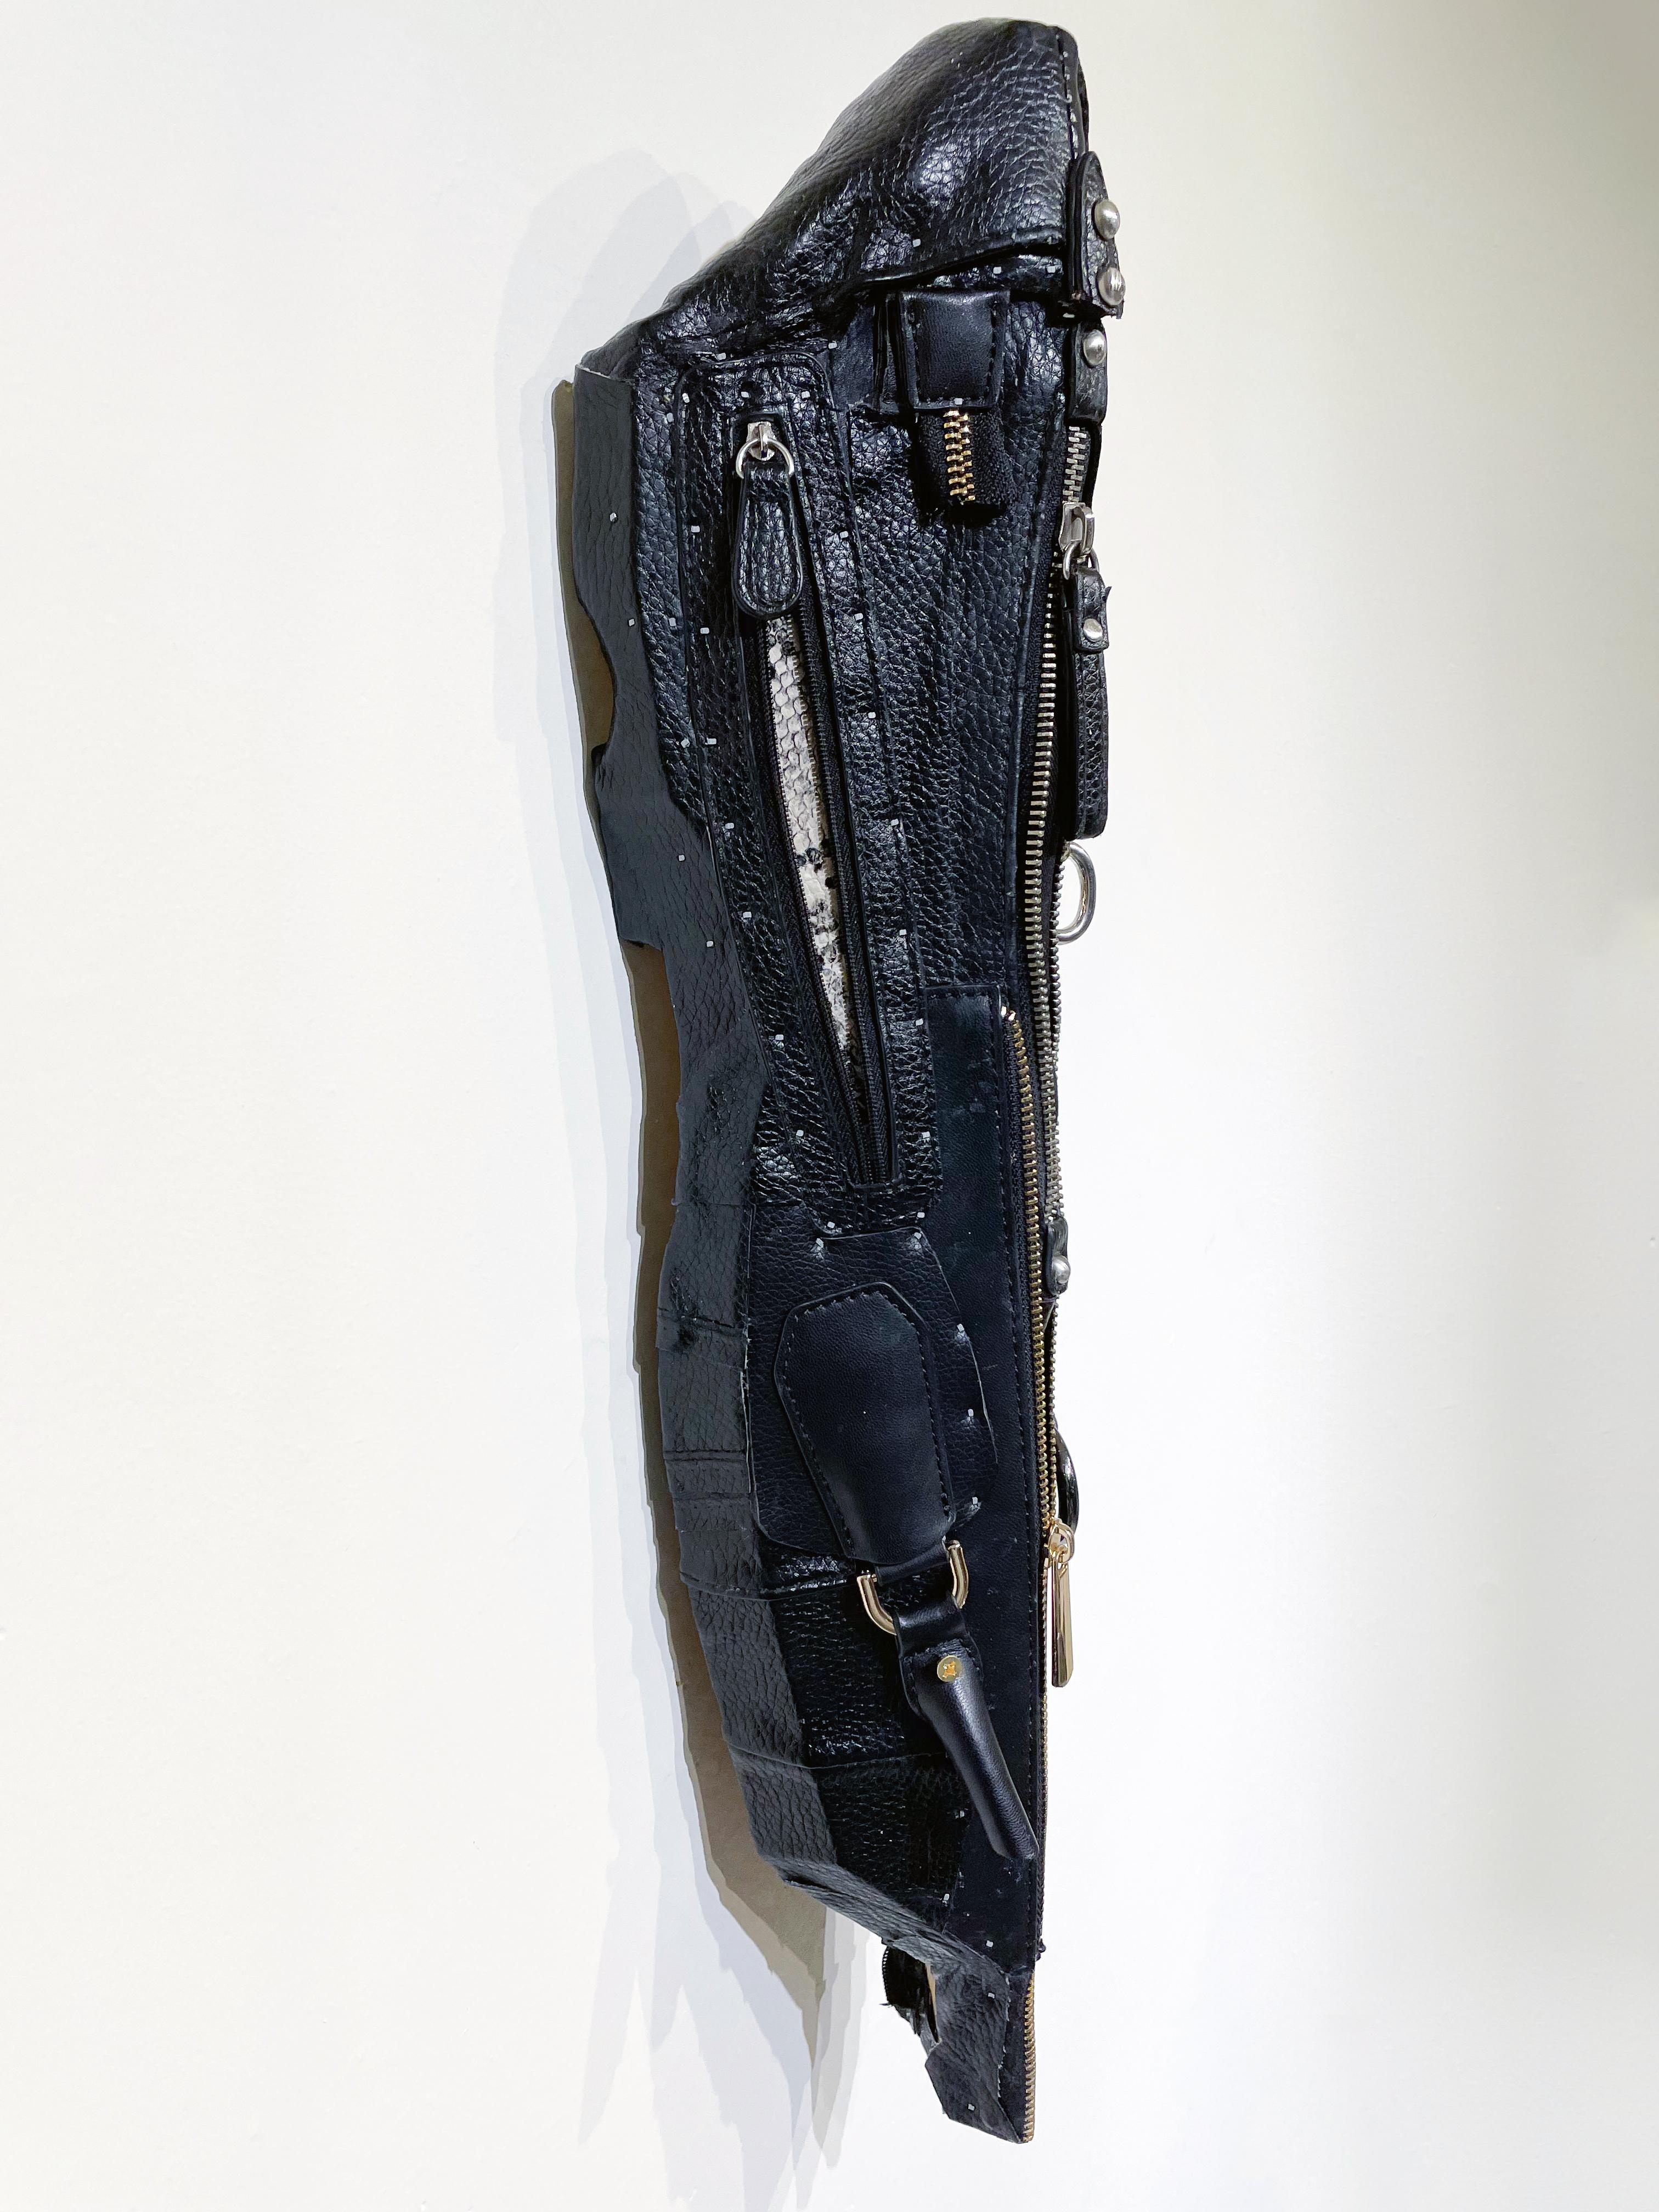 Linda Stein, Twilight Protector 1226 Contemporary Mixed Media Leather Sculpture  For Sale 2